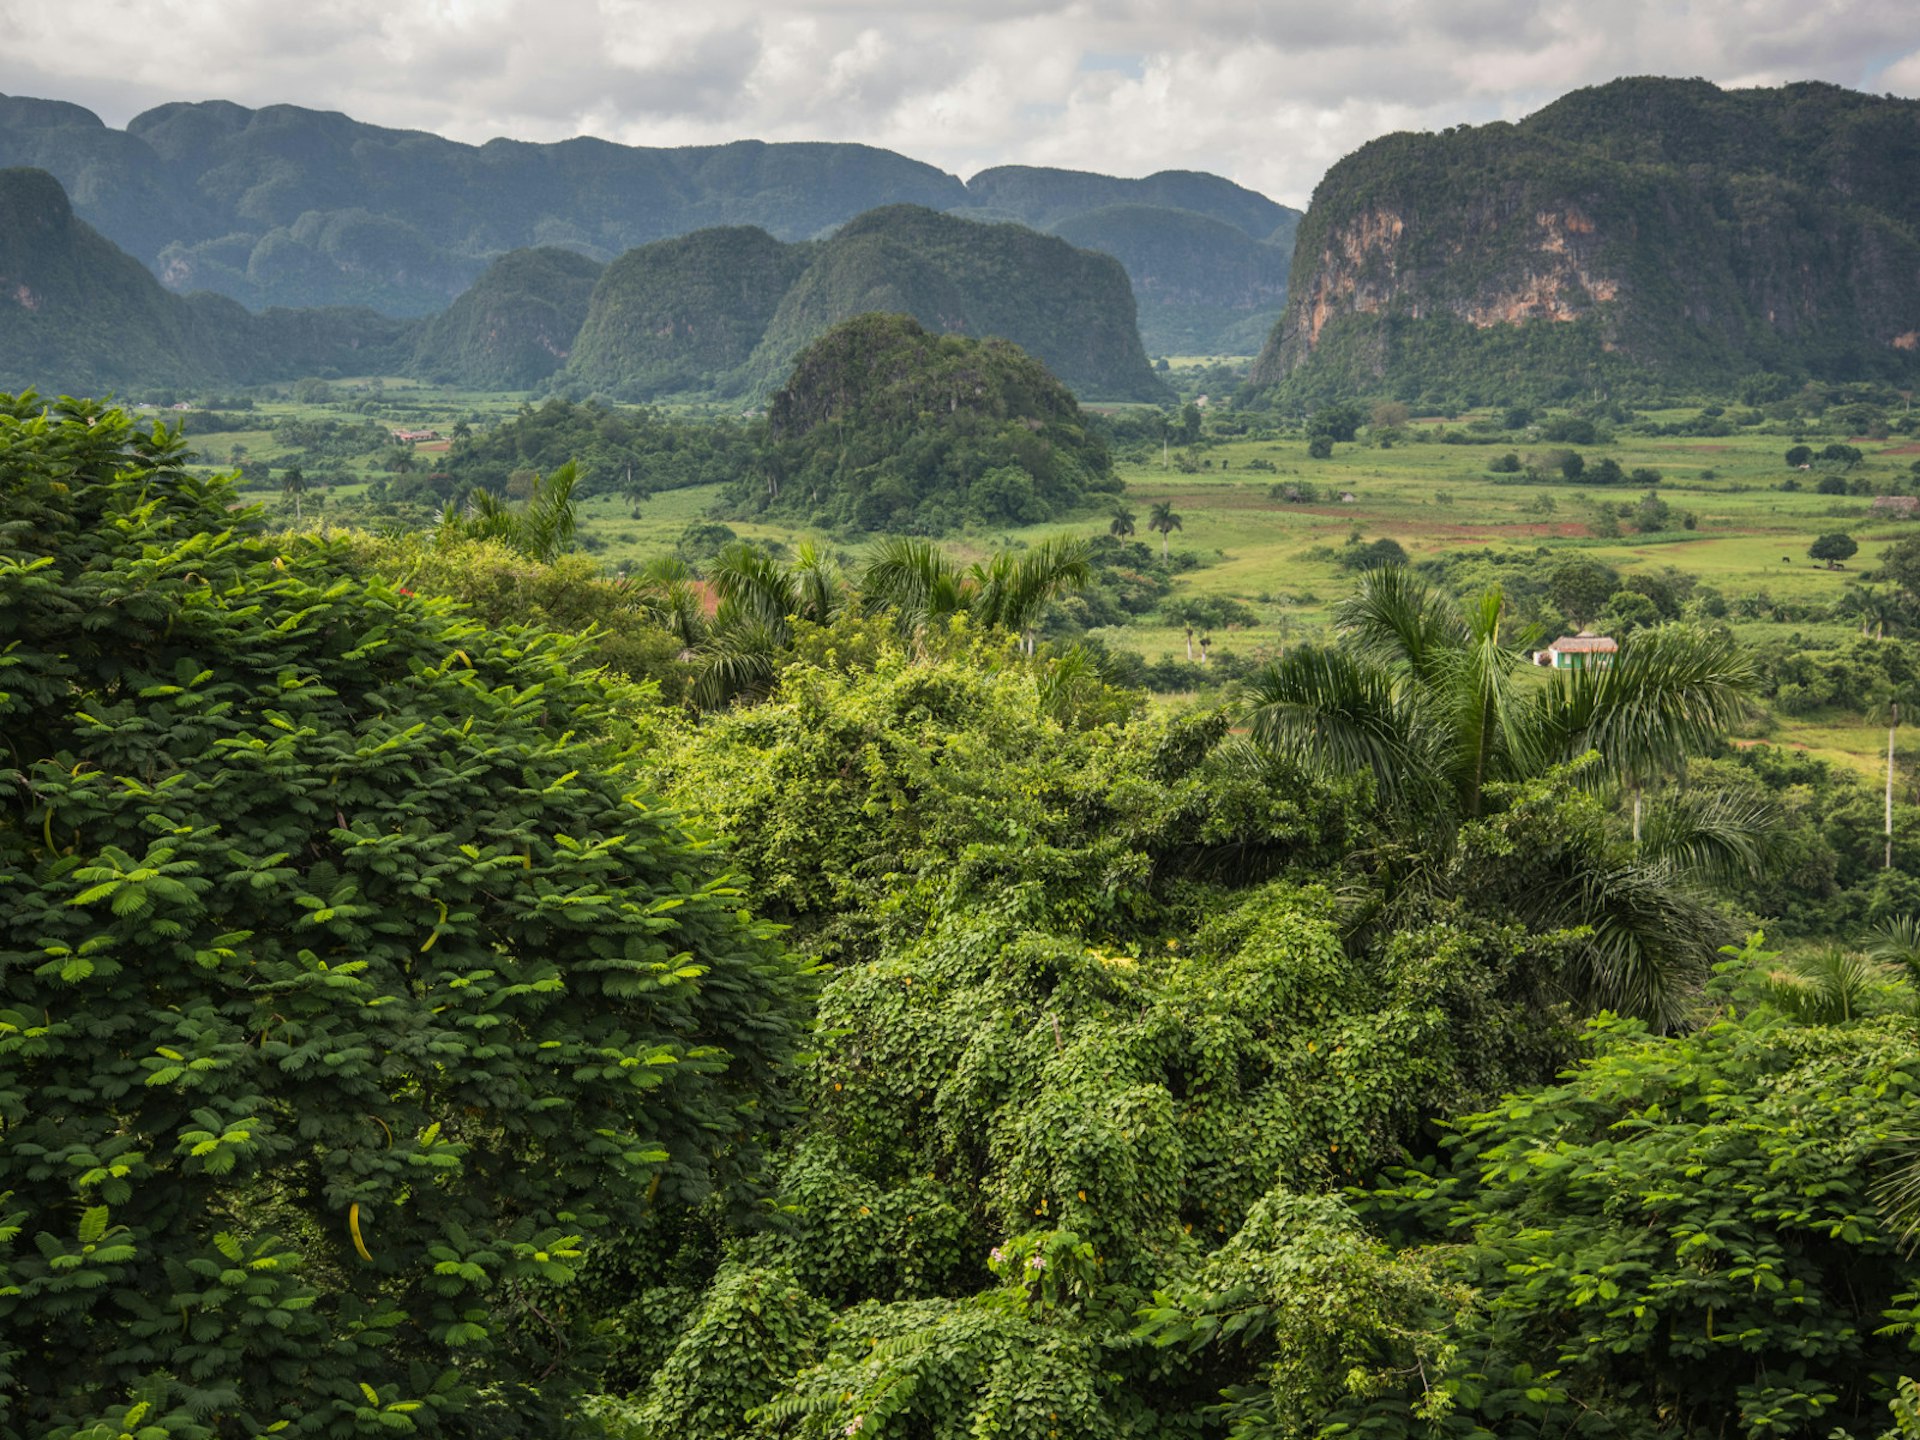 Overlooking the tobacco plantations of of the Valle Vinales © merc67 / Shutterstock